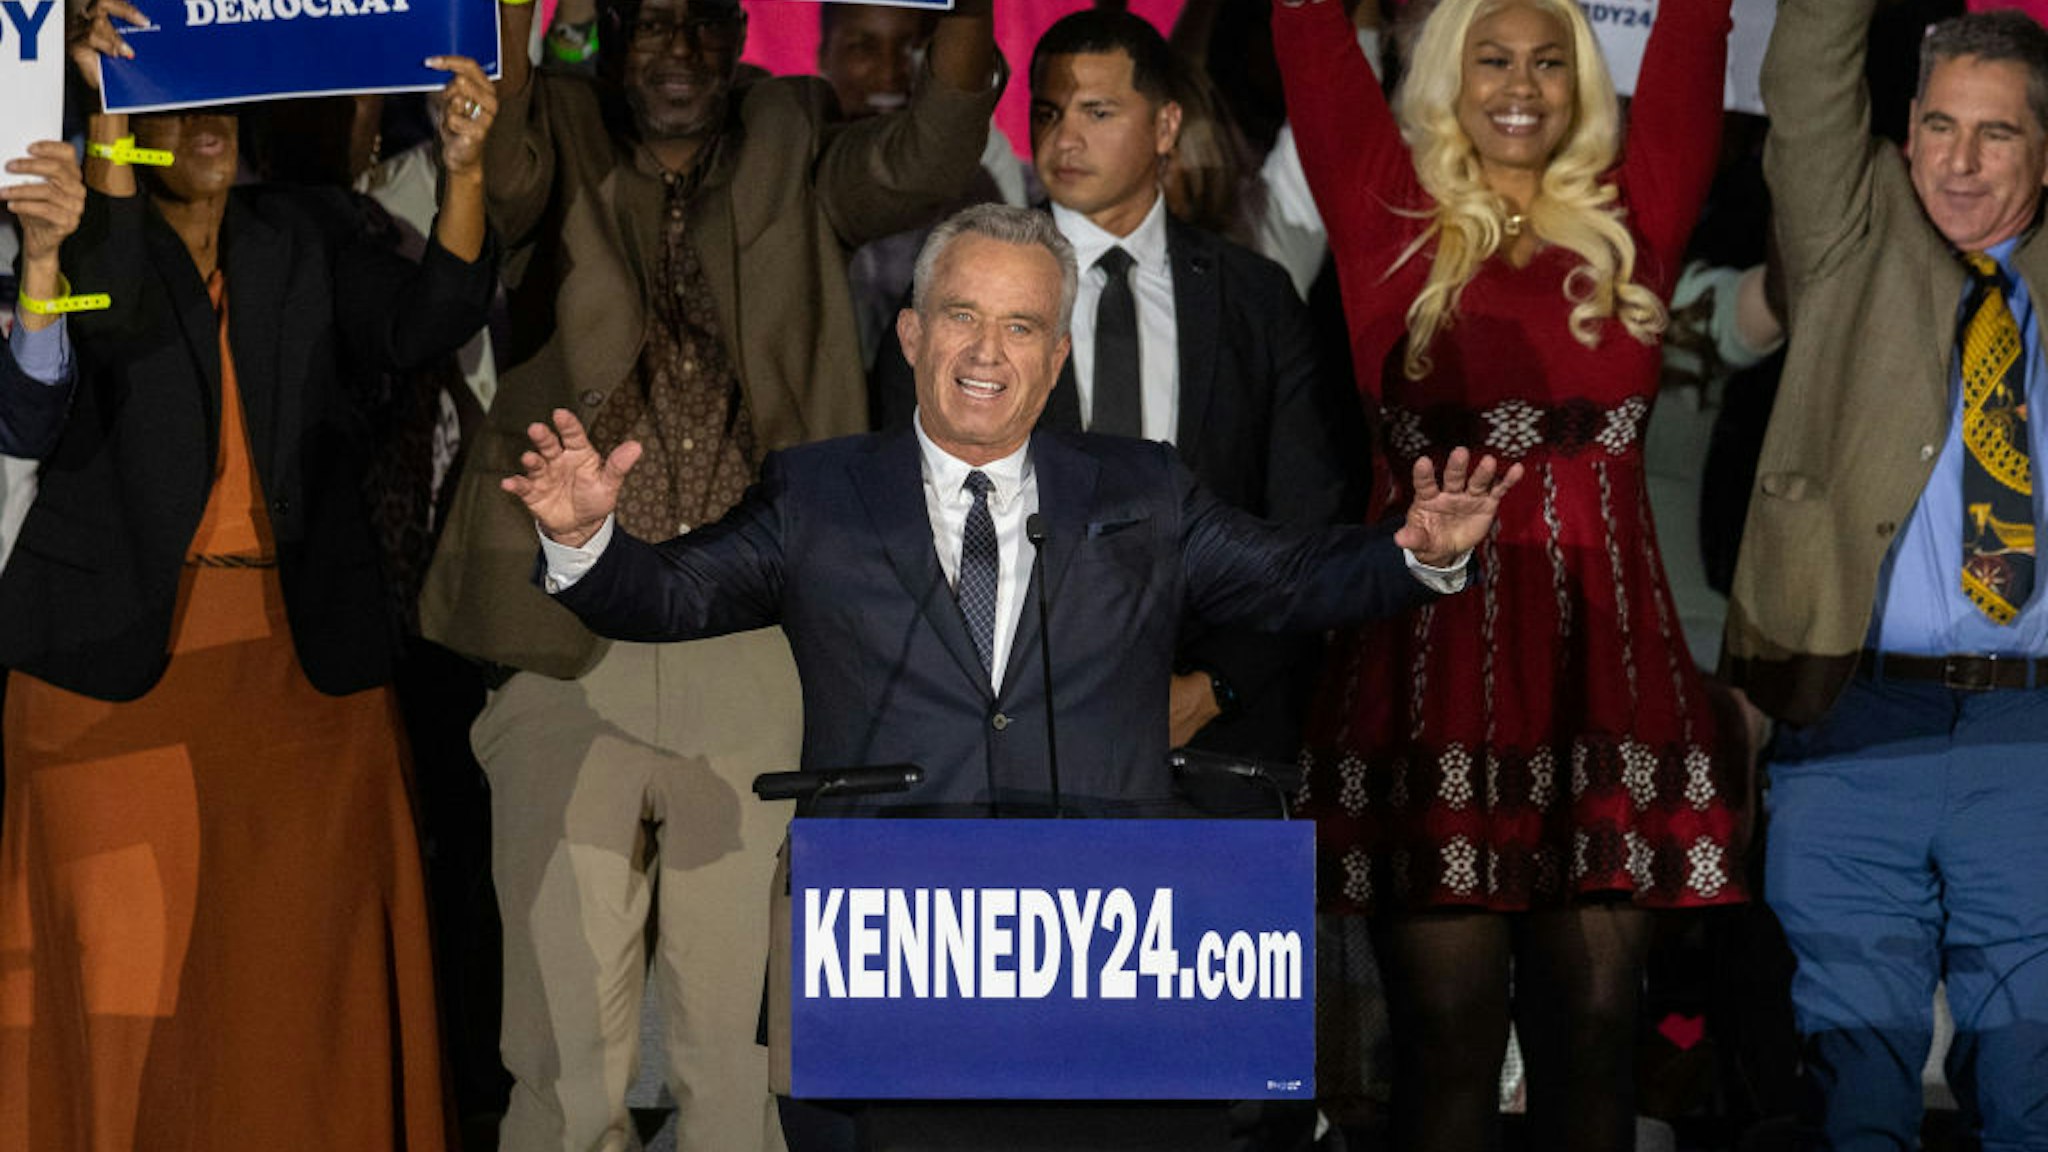 BOSTON, MA - APRIL 19: Robert F. Kennedy Jr. officially announces his candidacy for President on April 19, 2023 in Boston, Massachusetts. An outspoken anti-vaccine activist, RFK Jr. joins self-help author Marianne Williamson in the Democratic presidential field of challengers for 2024.